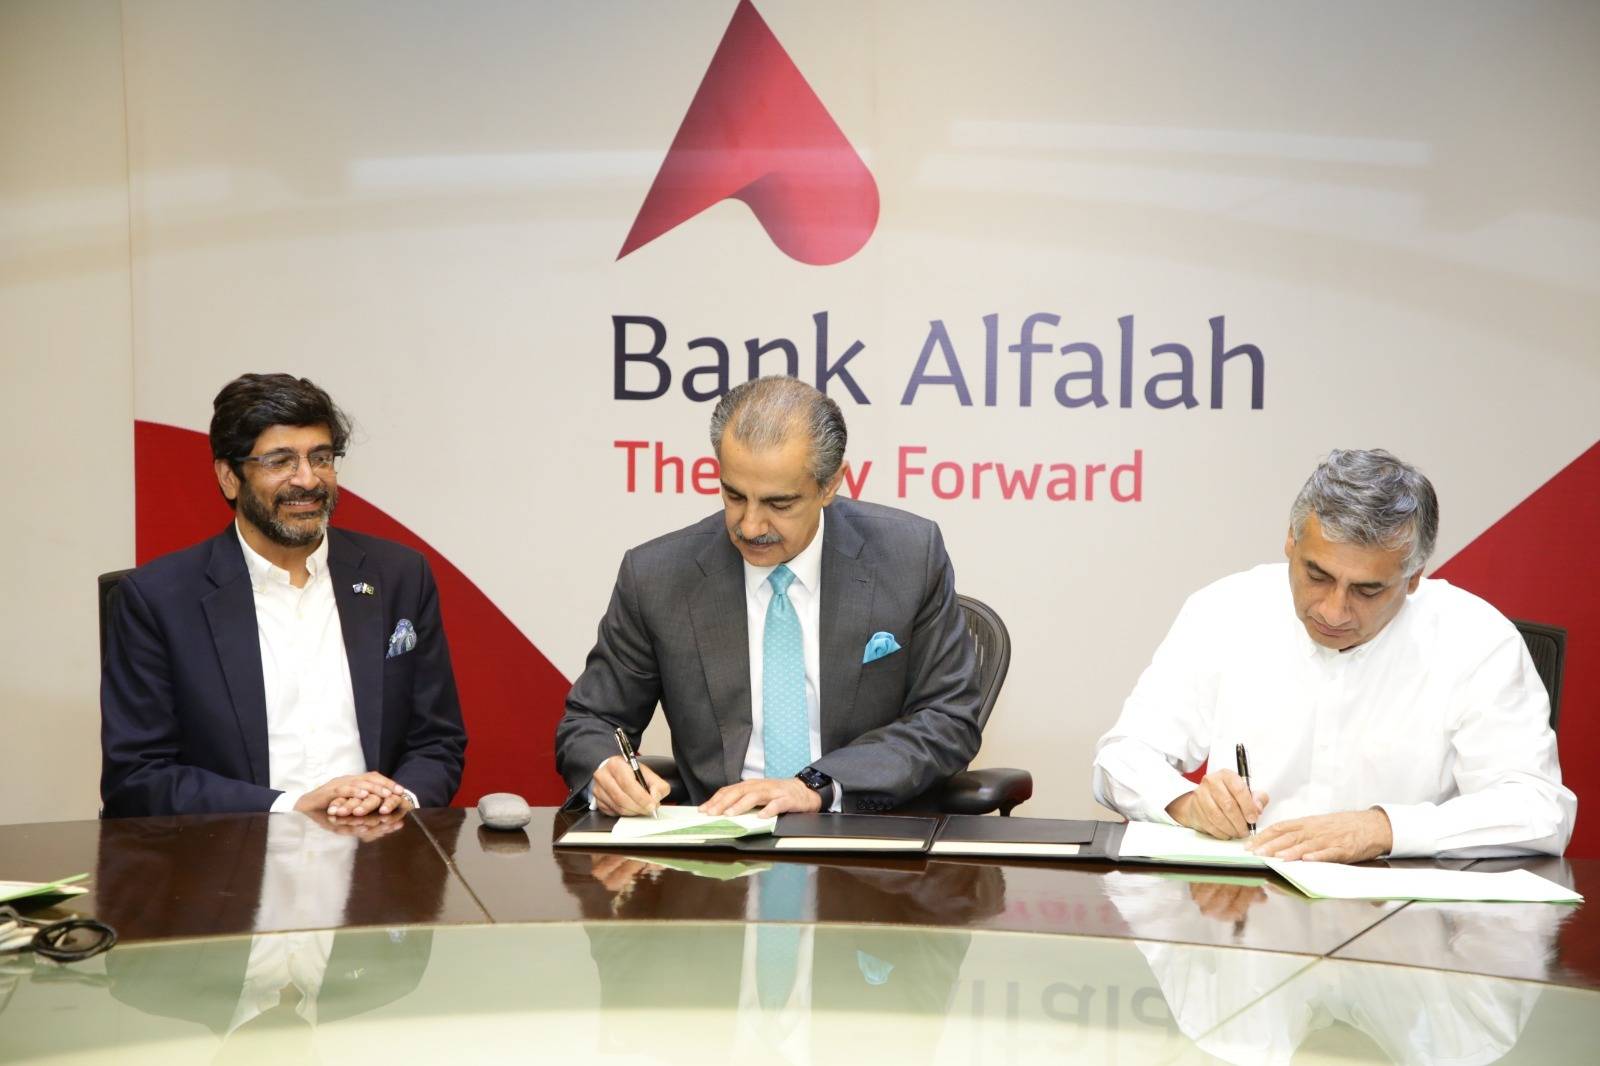 Bank Alfalah partners with Karachi Relief Trust for Sustainable Housing for Flood-Impacted Communities